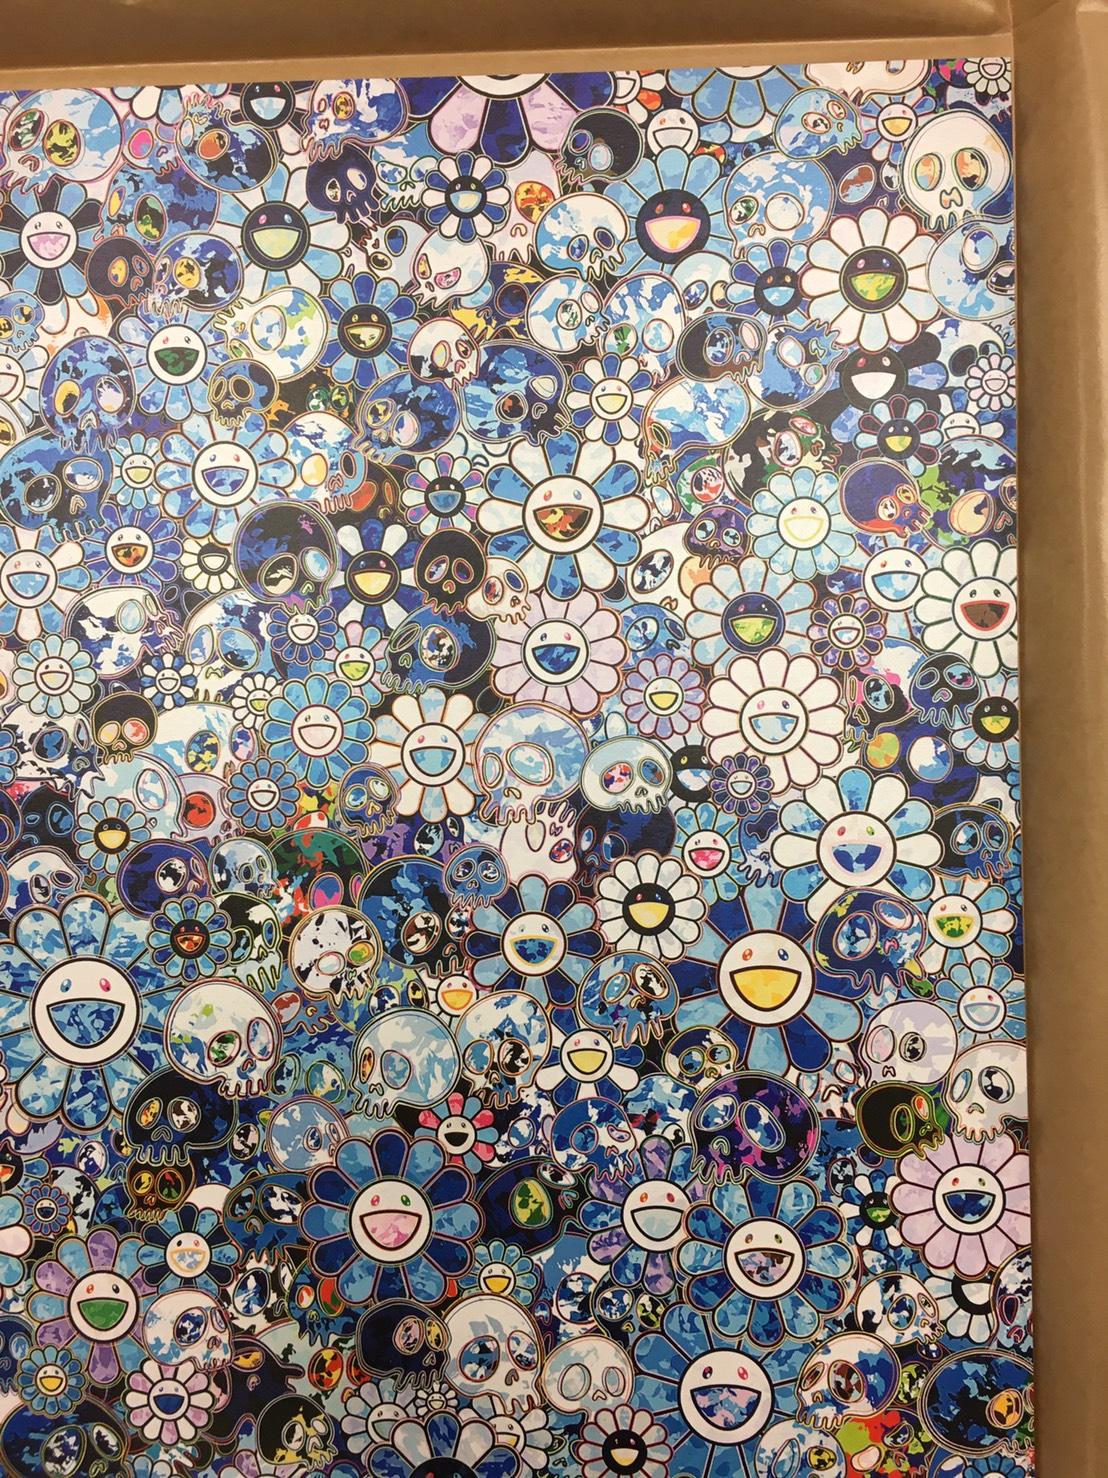 Zero-One. Limited Edition (print) by Takashi Murakami signed and numbered 3